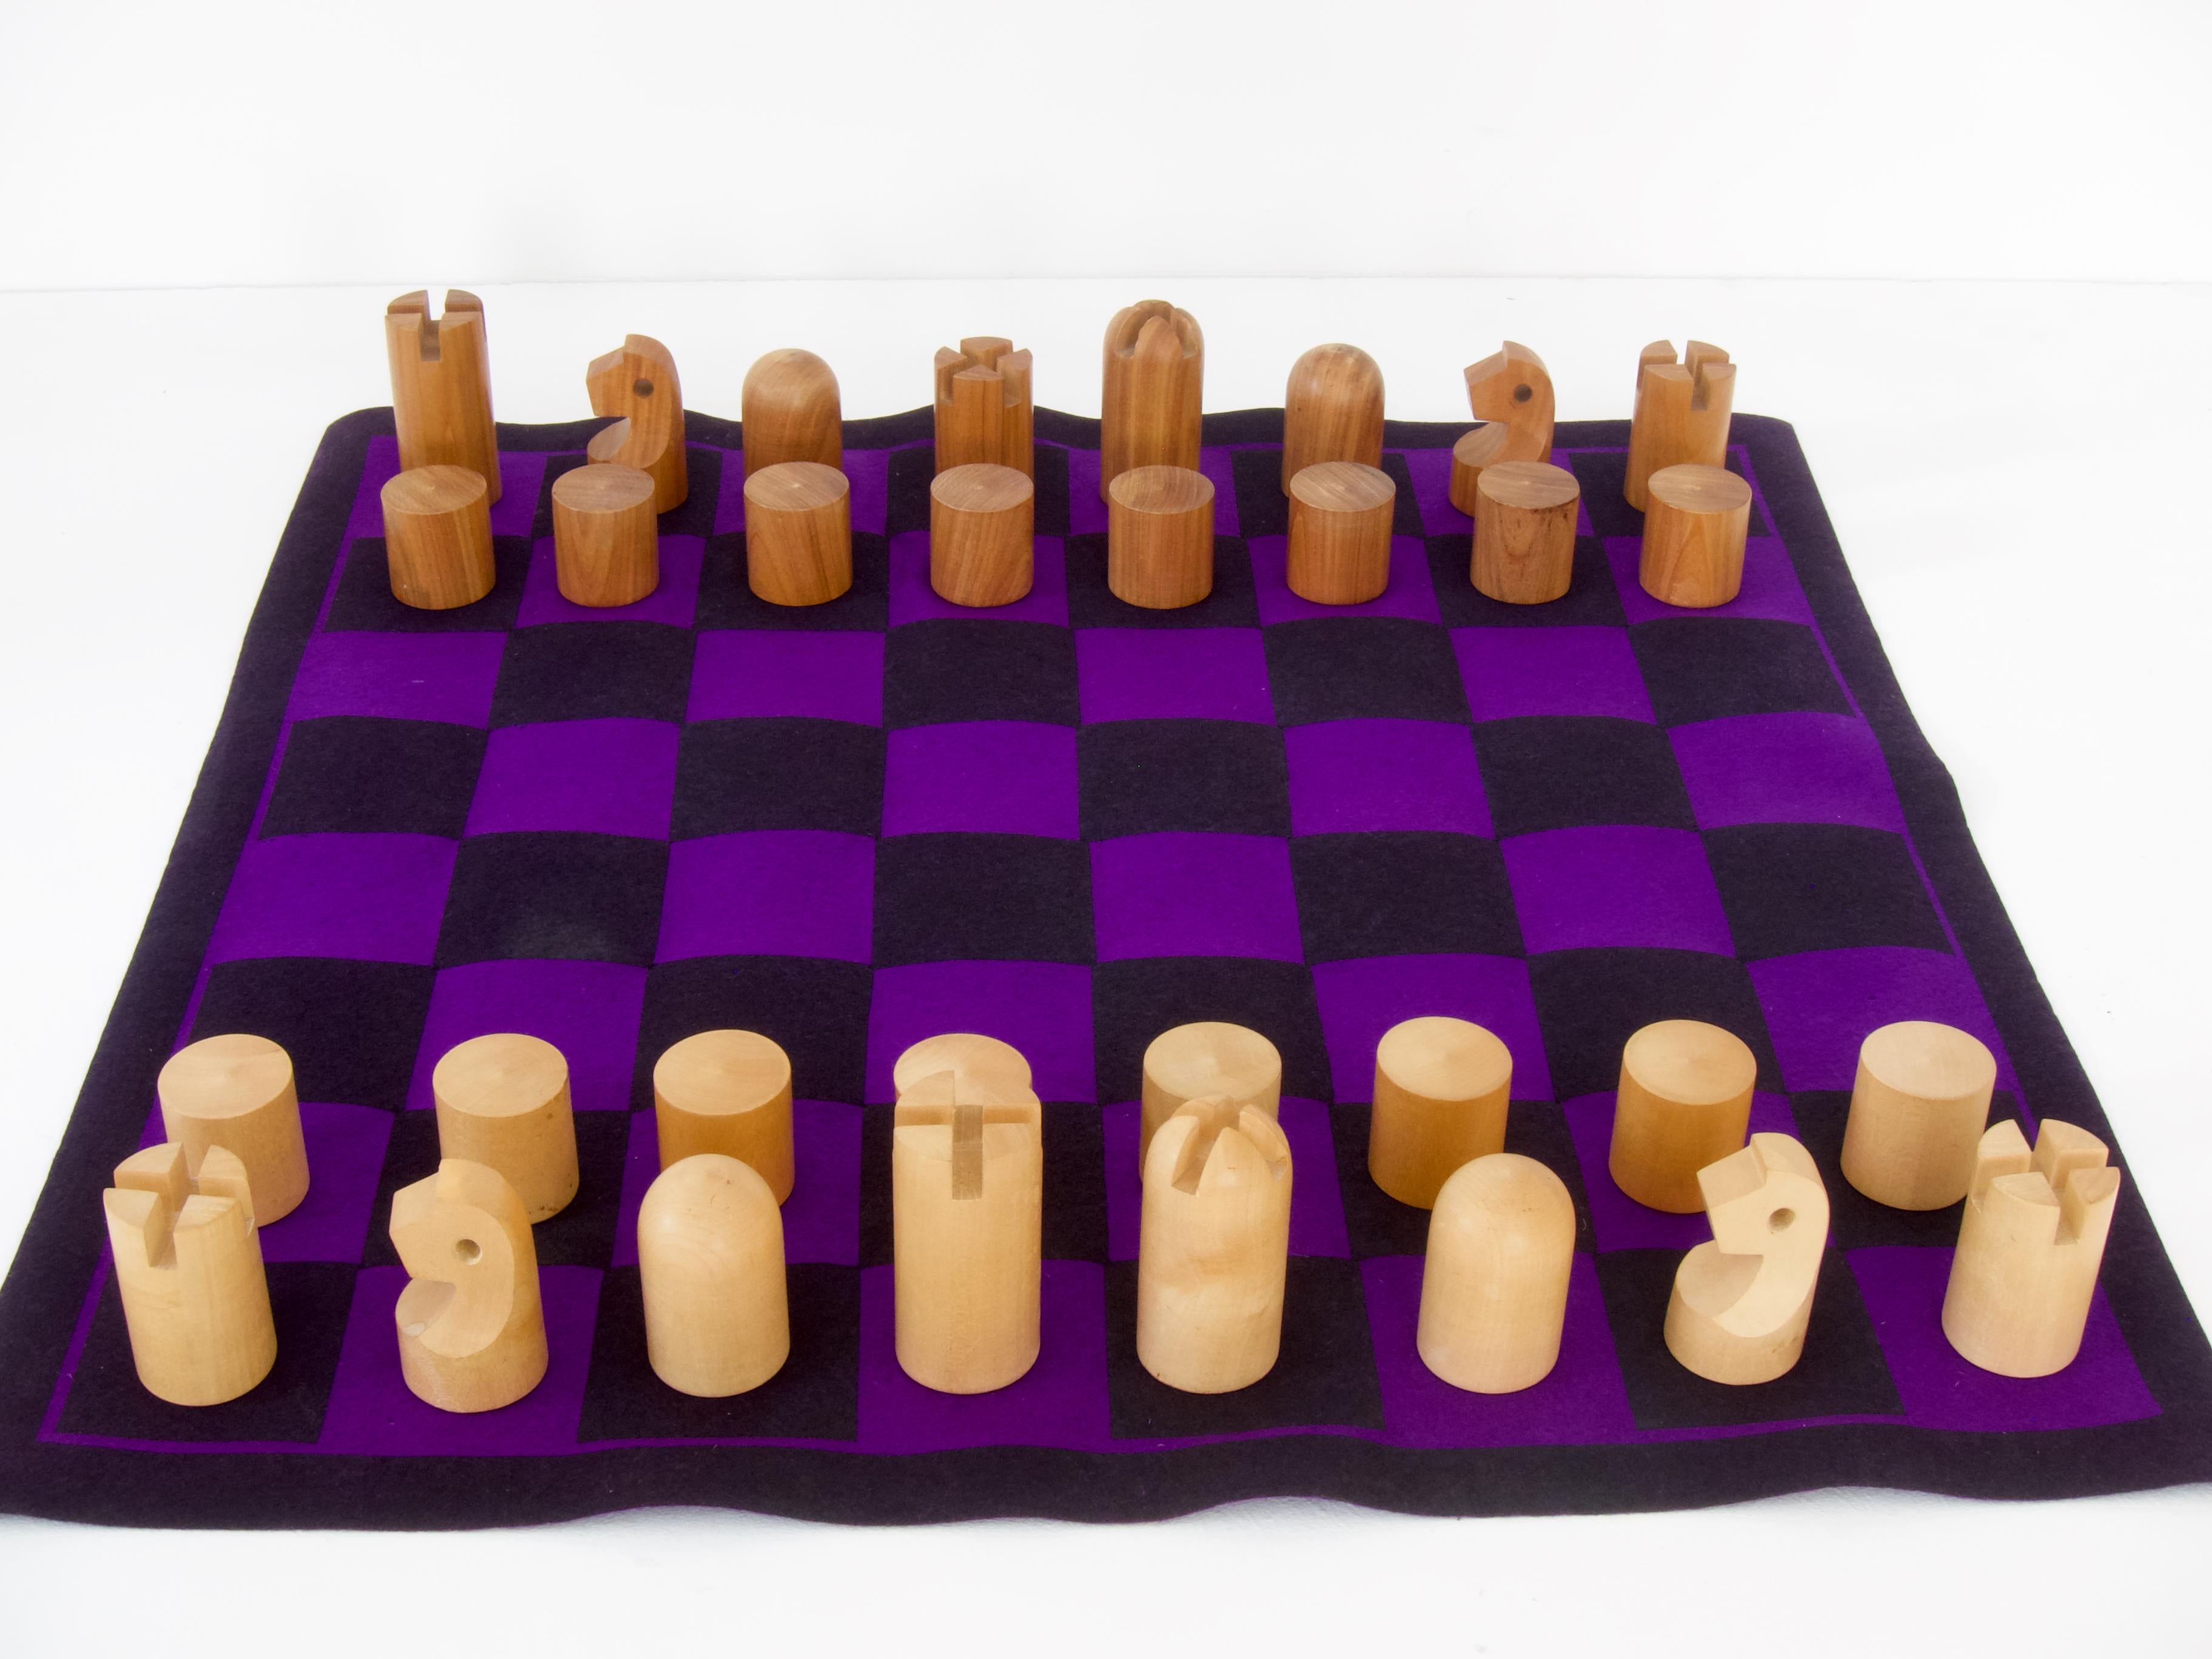 Mid-20th Century Rare Chess Set by Carl Auböck For Sale